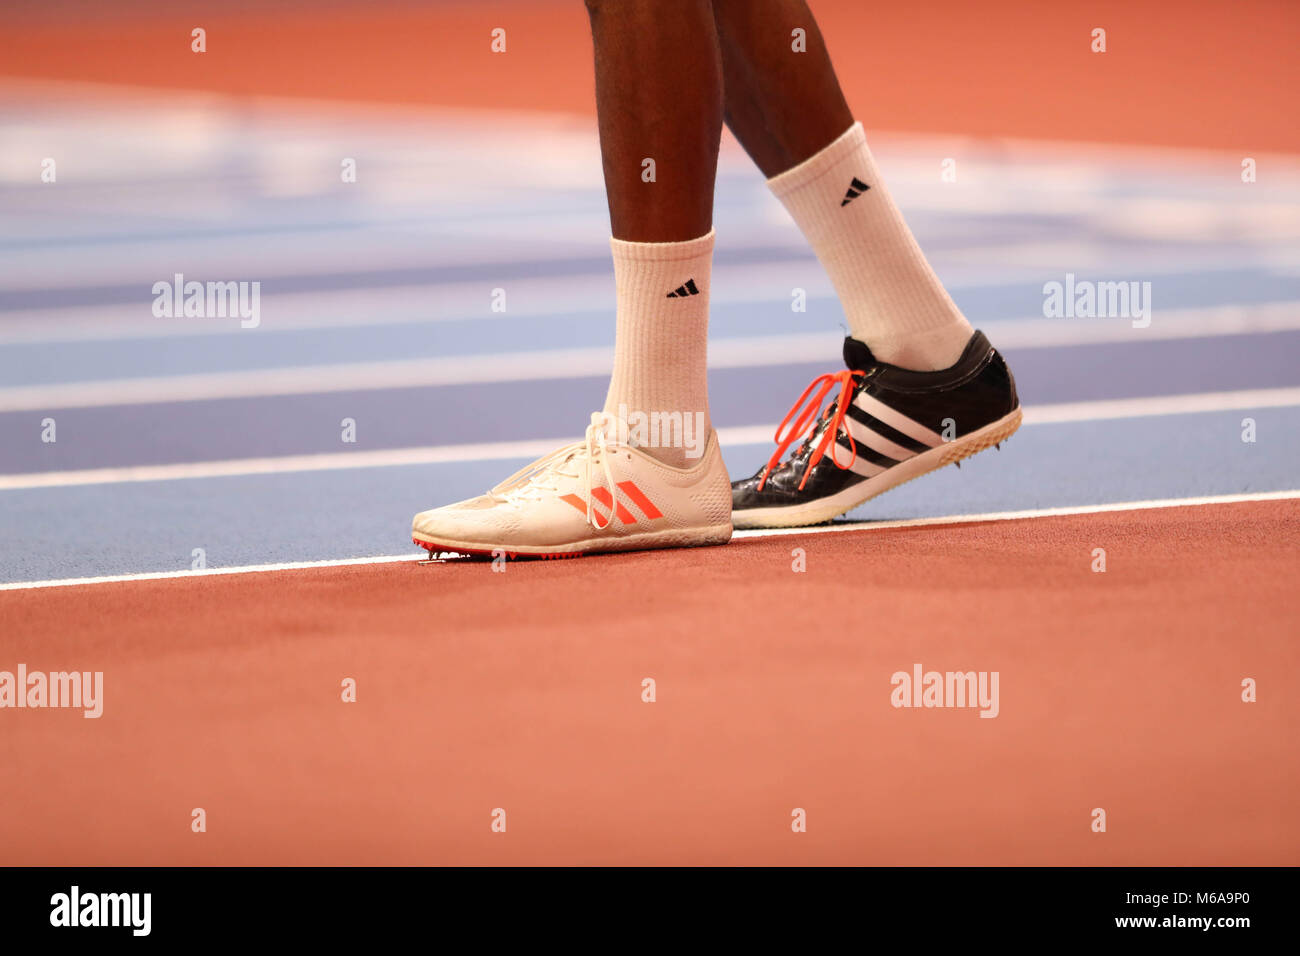 March 1, 2018 - Birmingham, United Kingdom - A track athlete wears  different coloured adidas spikes during the men's high jump at the IAAF  World Indoor Championships in Birmingham. (Credit Image: ©